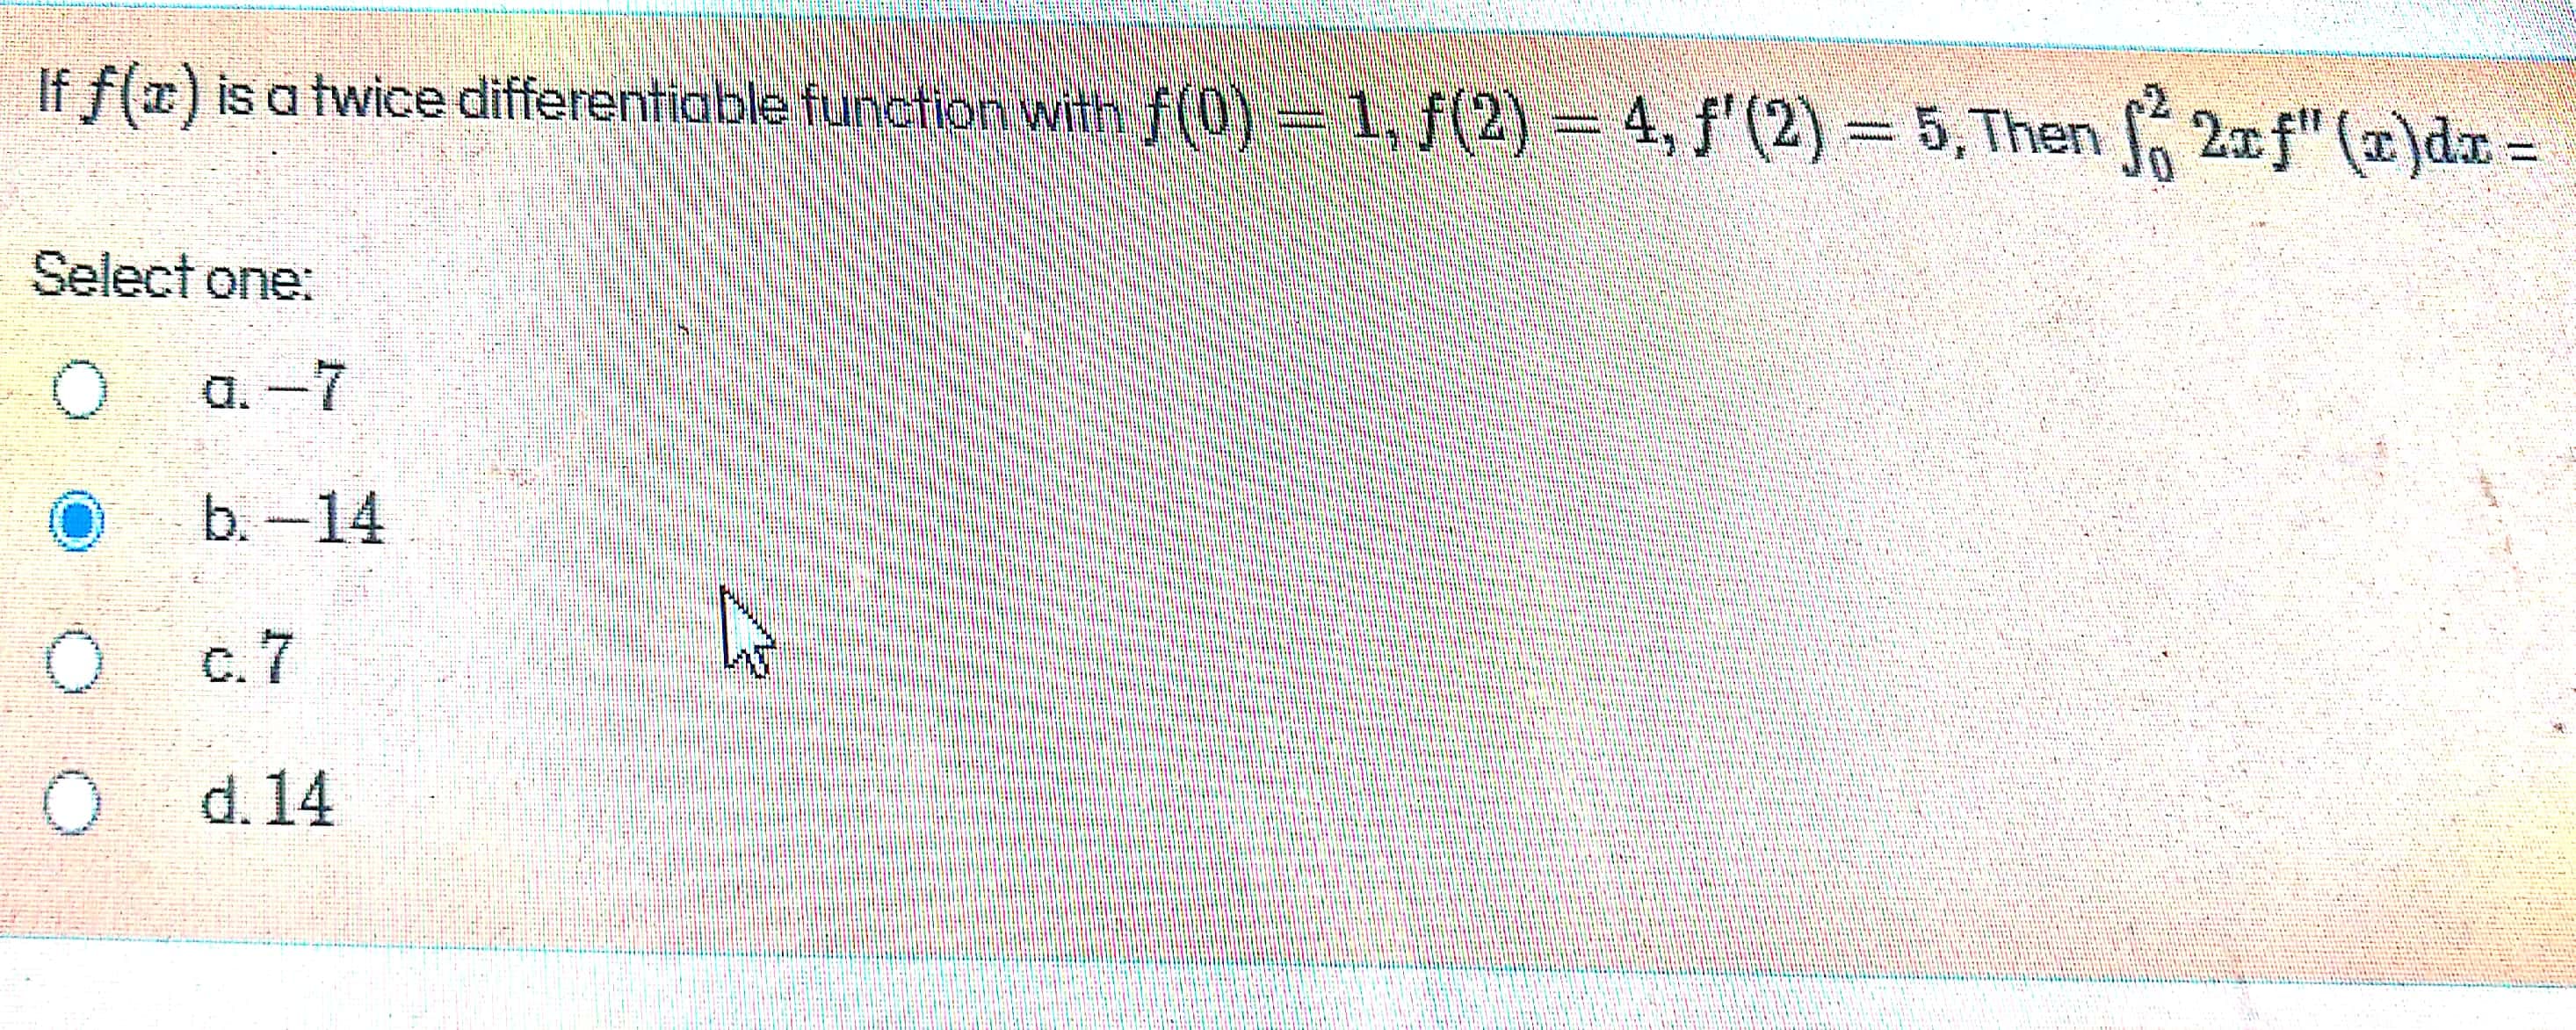 If f(x) is a twice differentiable function with f(0)= 1, f(2) = 4, f'(2) = 5, Then 2xf" ()d =
